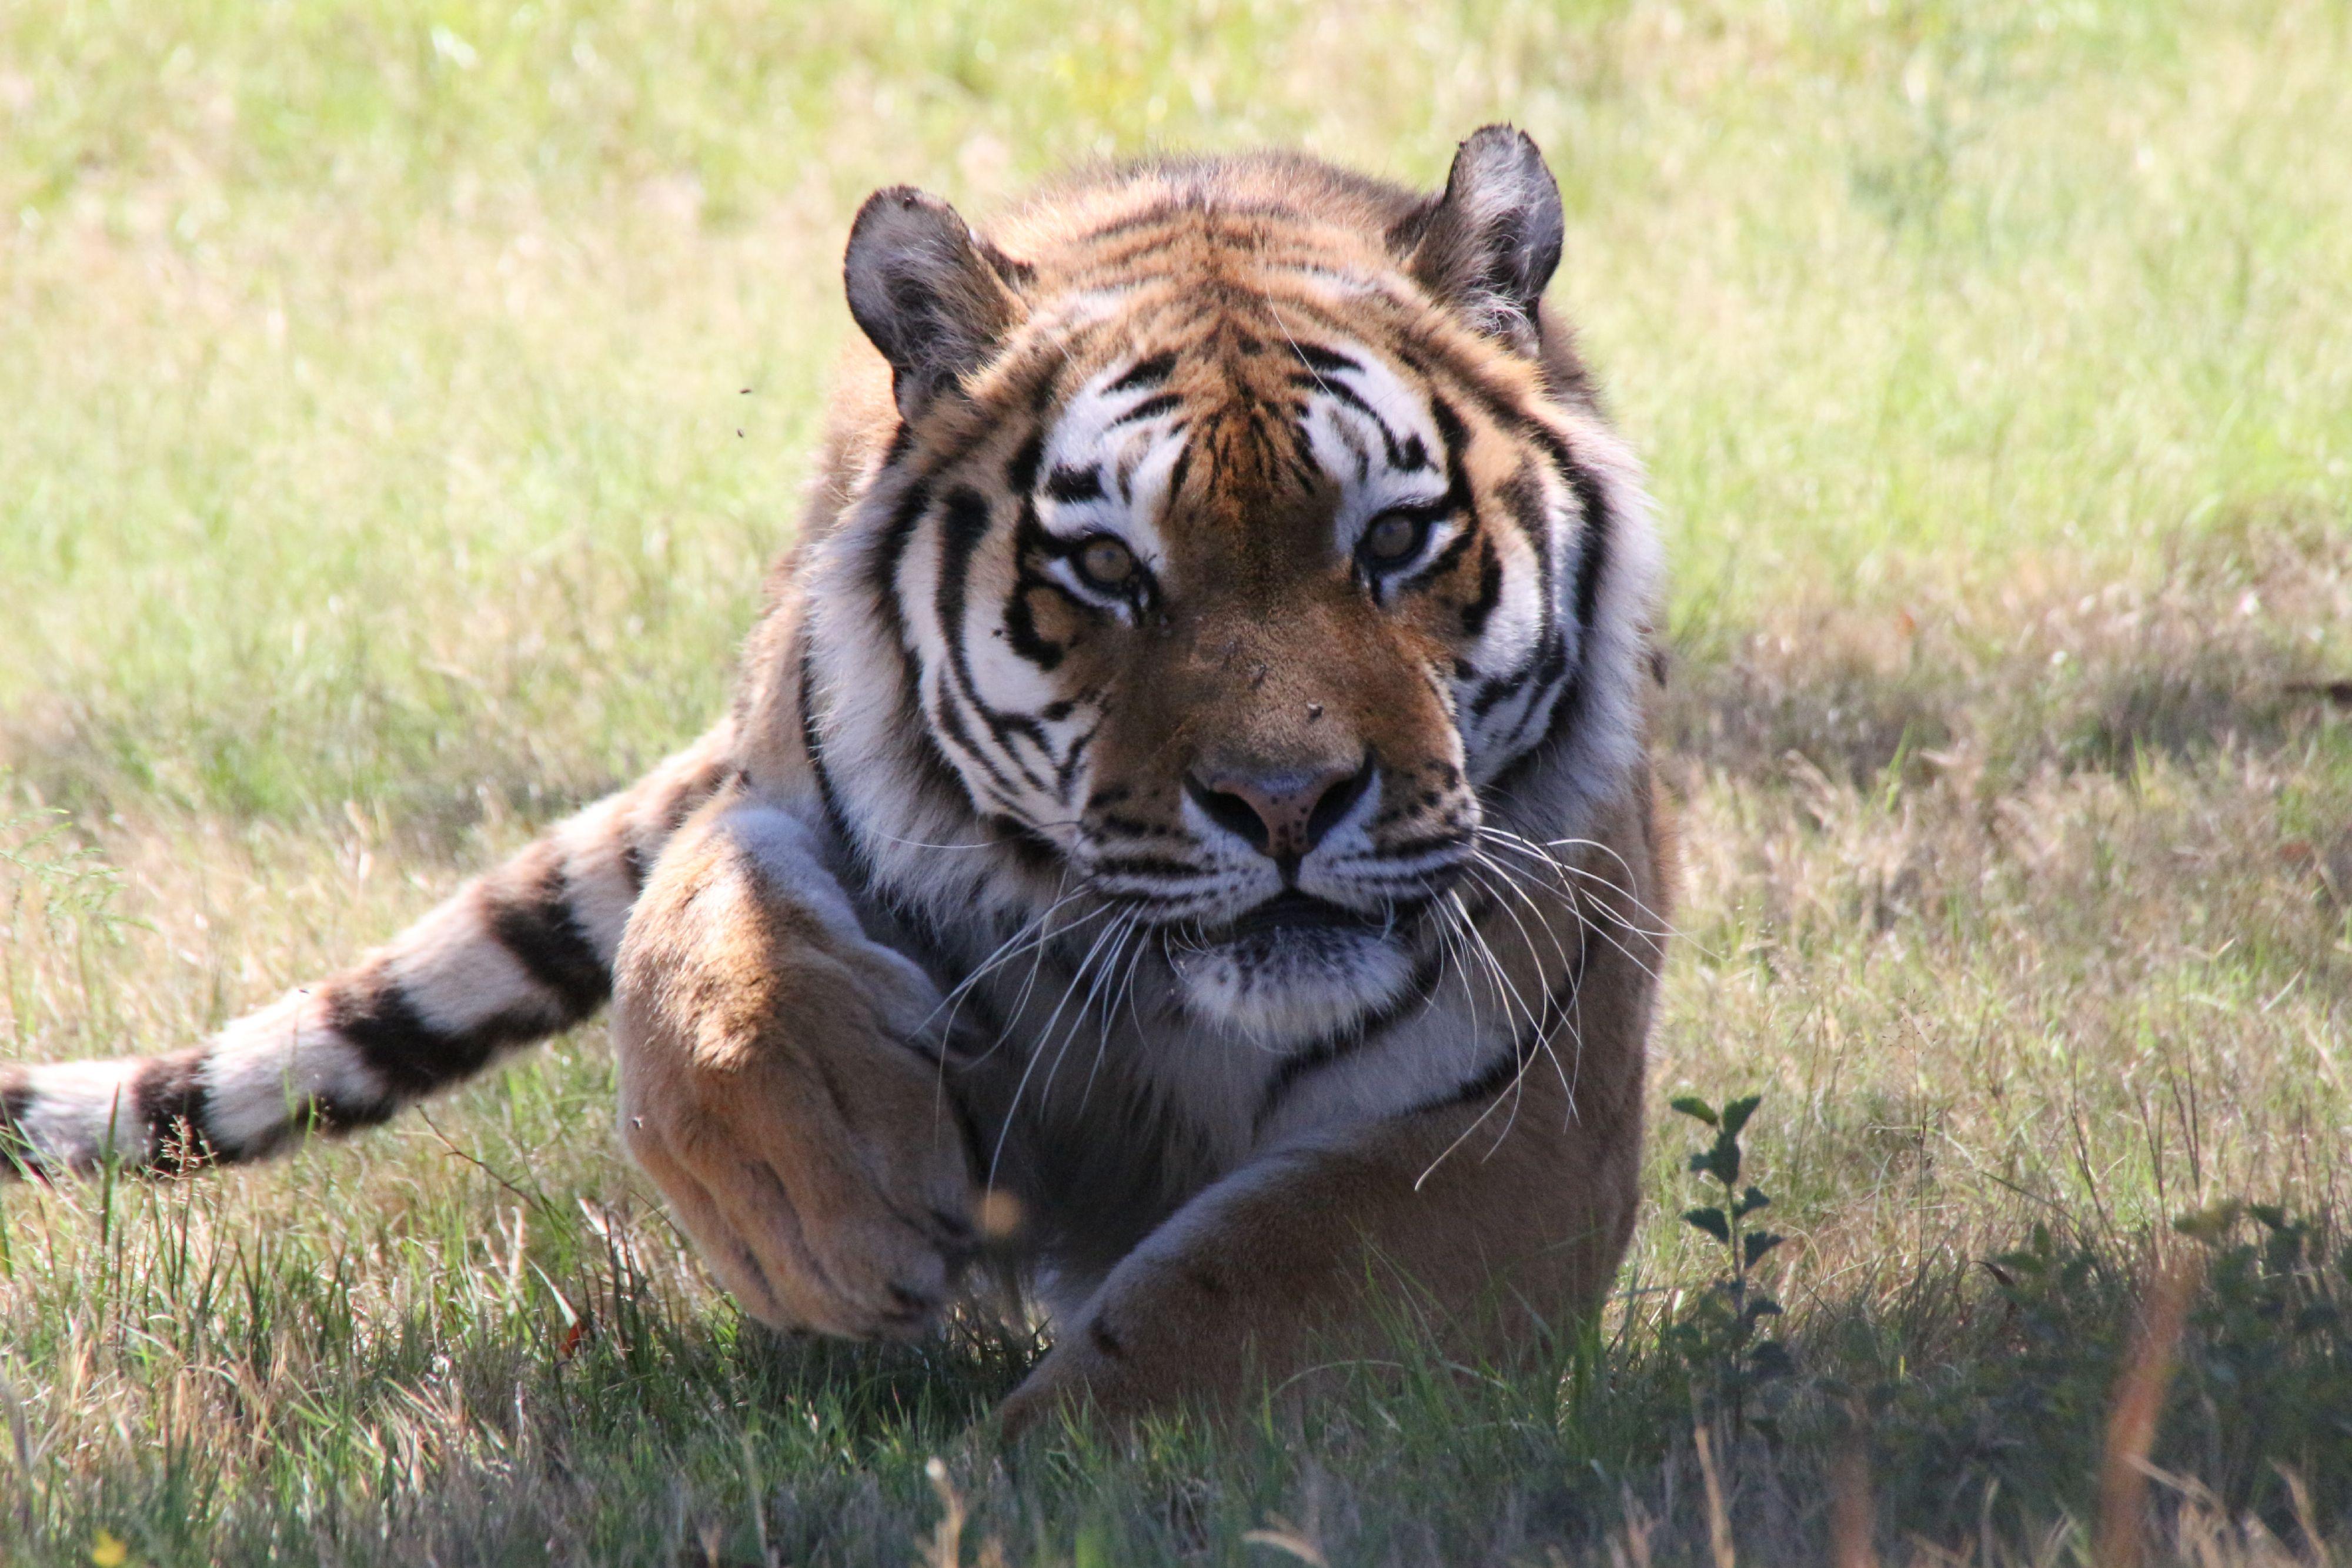 Big Cats in the Wild - FELIDA Big Cat Sanctuary - a project by FOUR PAWS